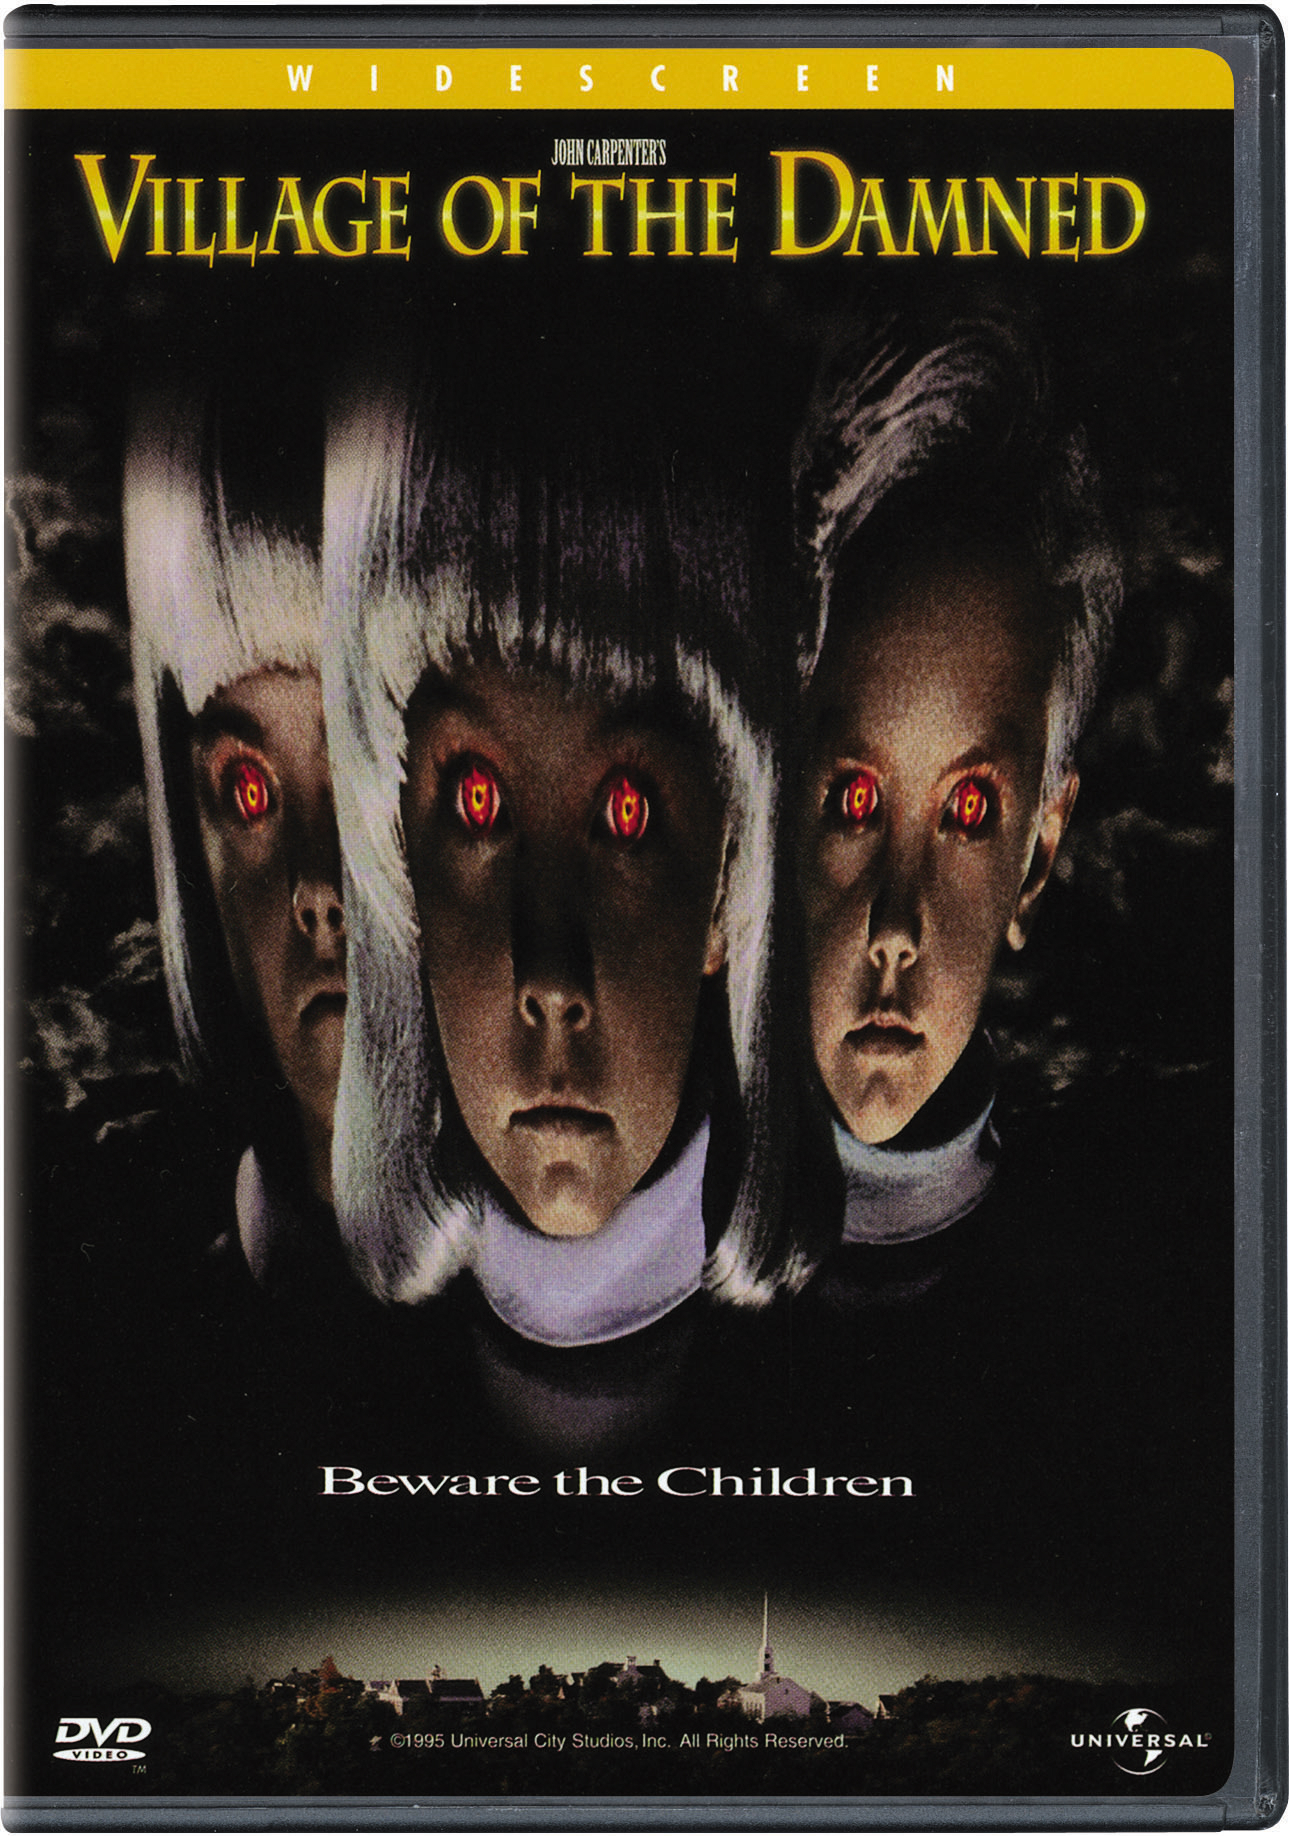 Village Of The Damned - DVD [ 1995 ]  - Sci Fi Movies On DVD - Movies On GRUV